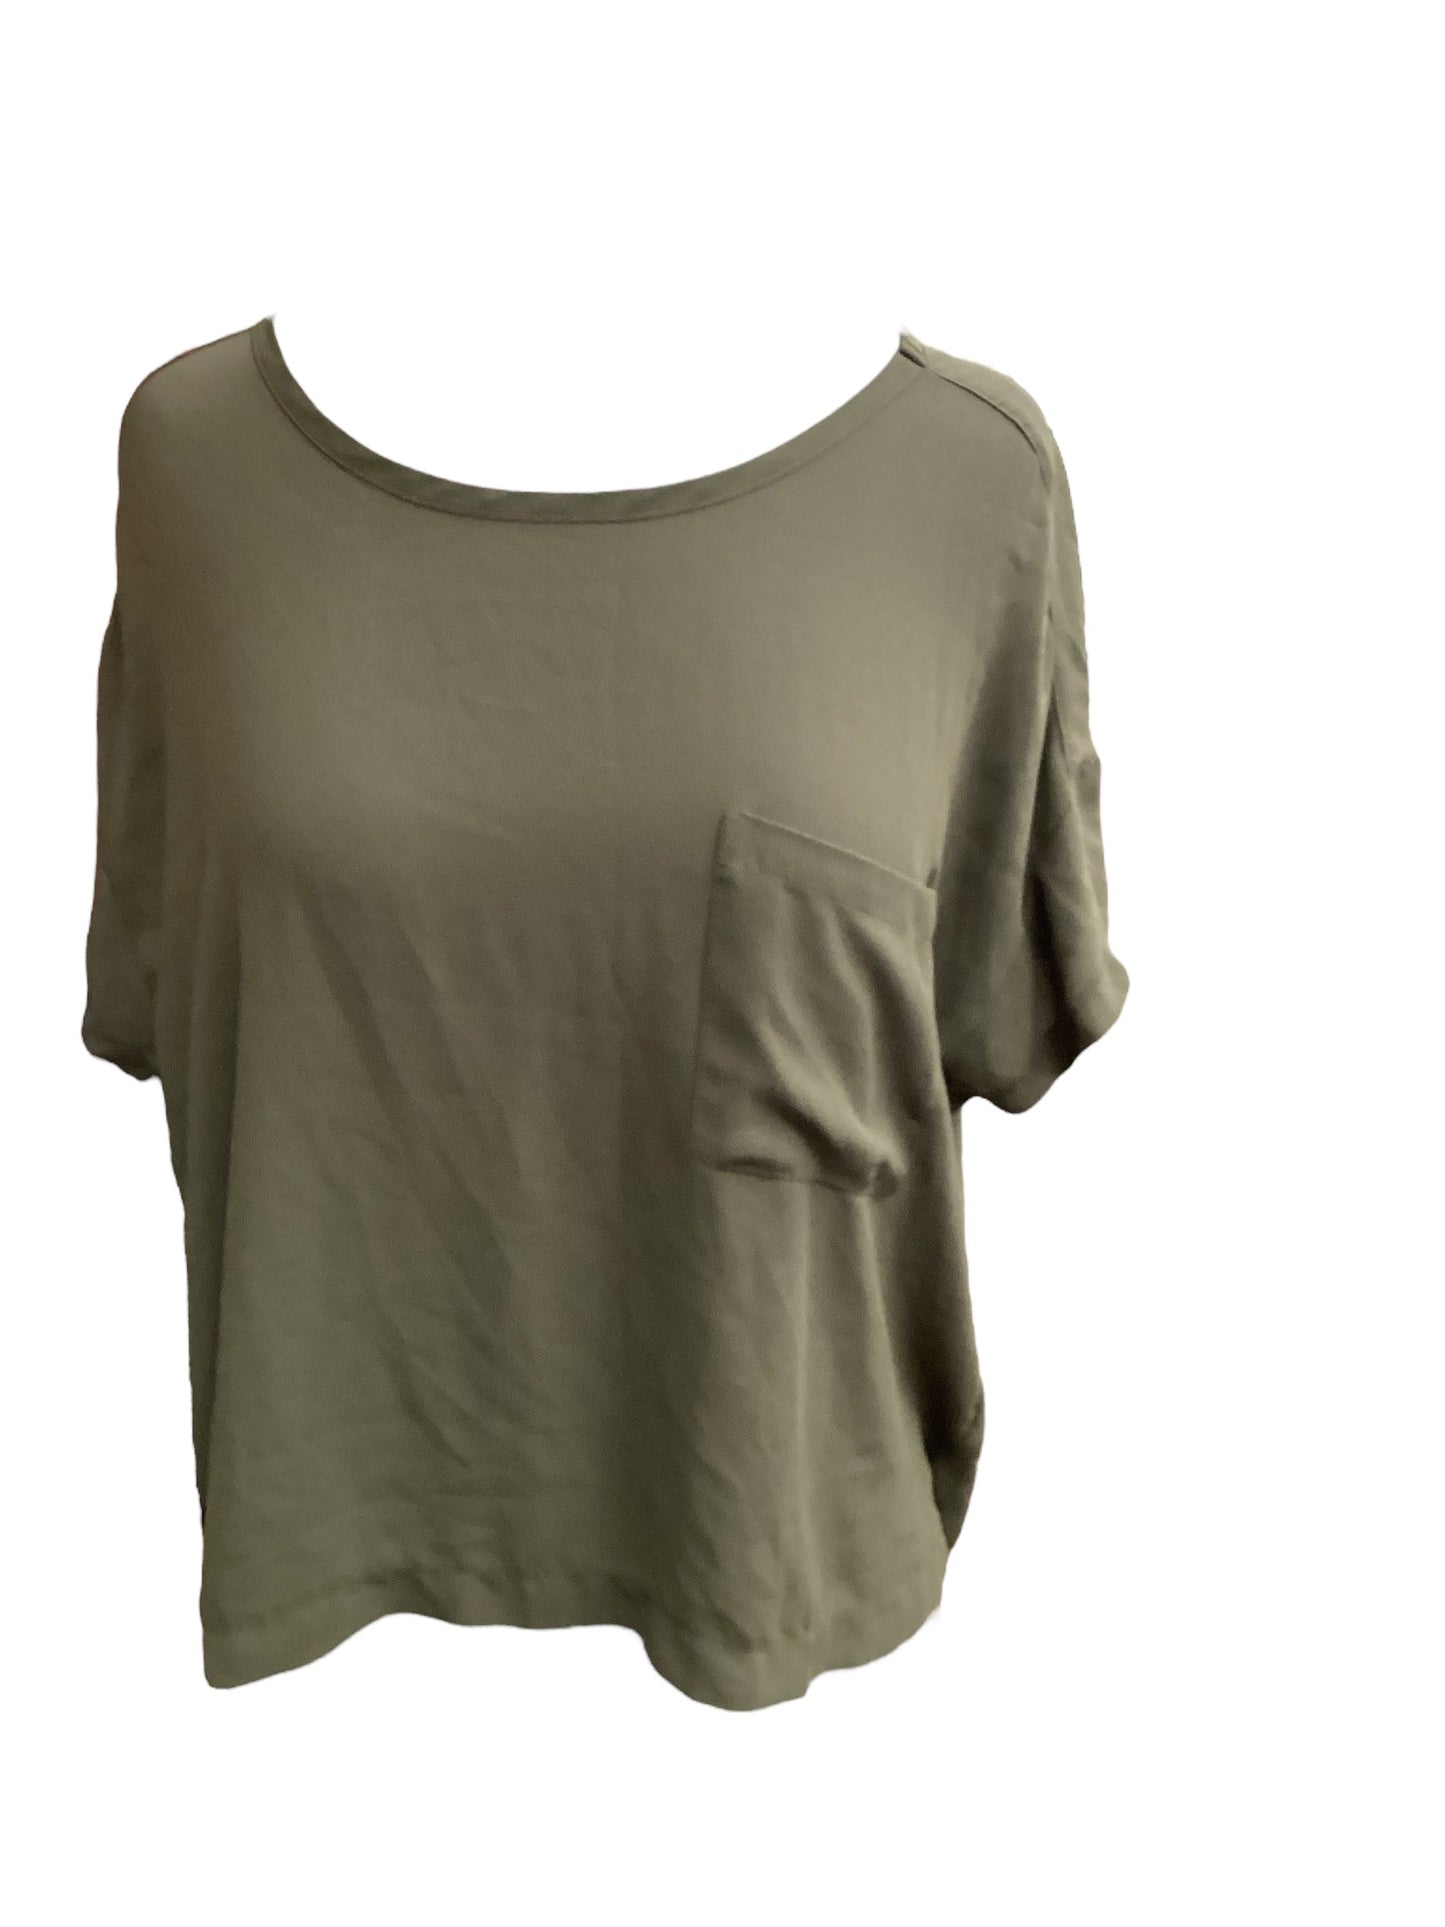 Green Top Short Sleeve Lush, Size S